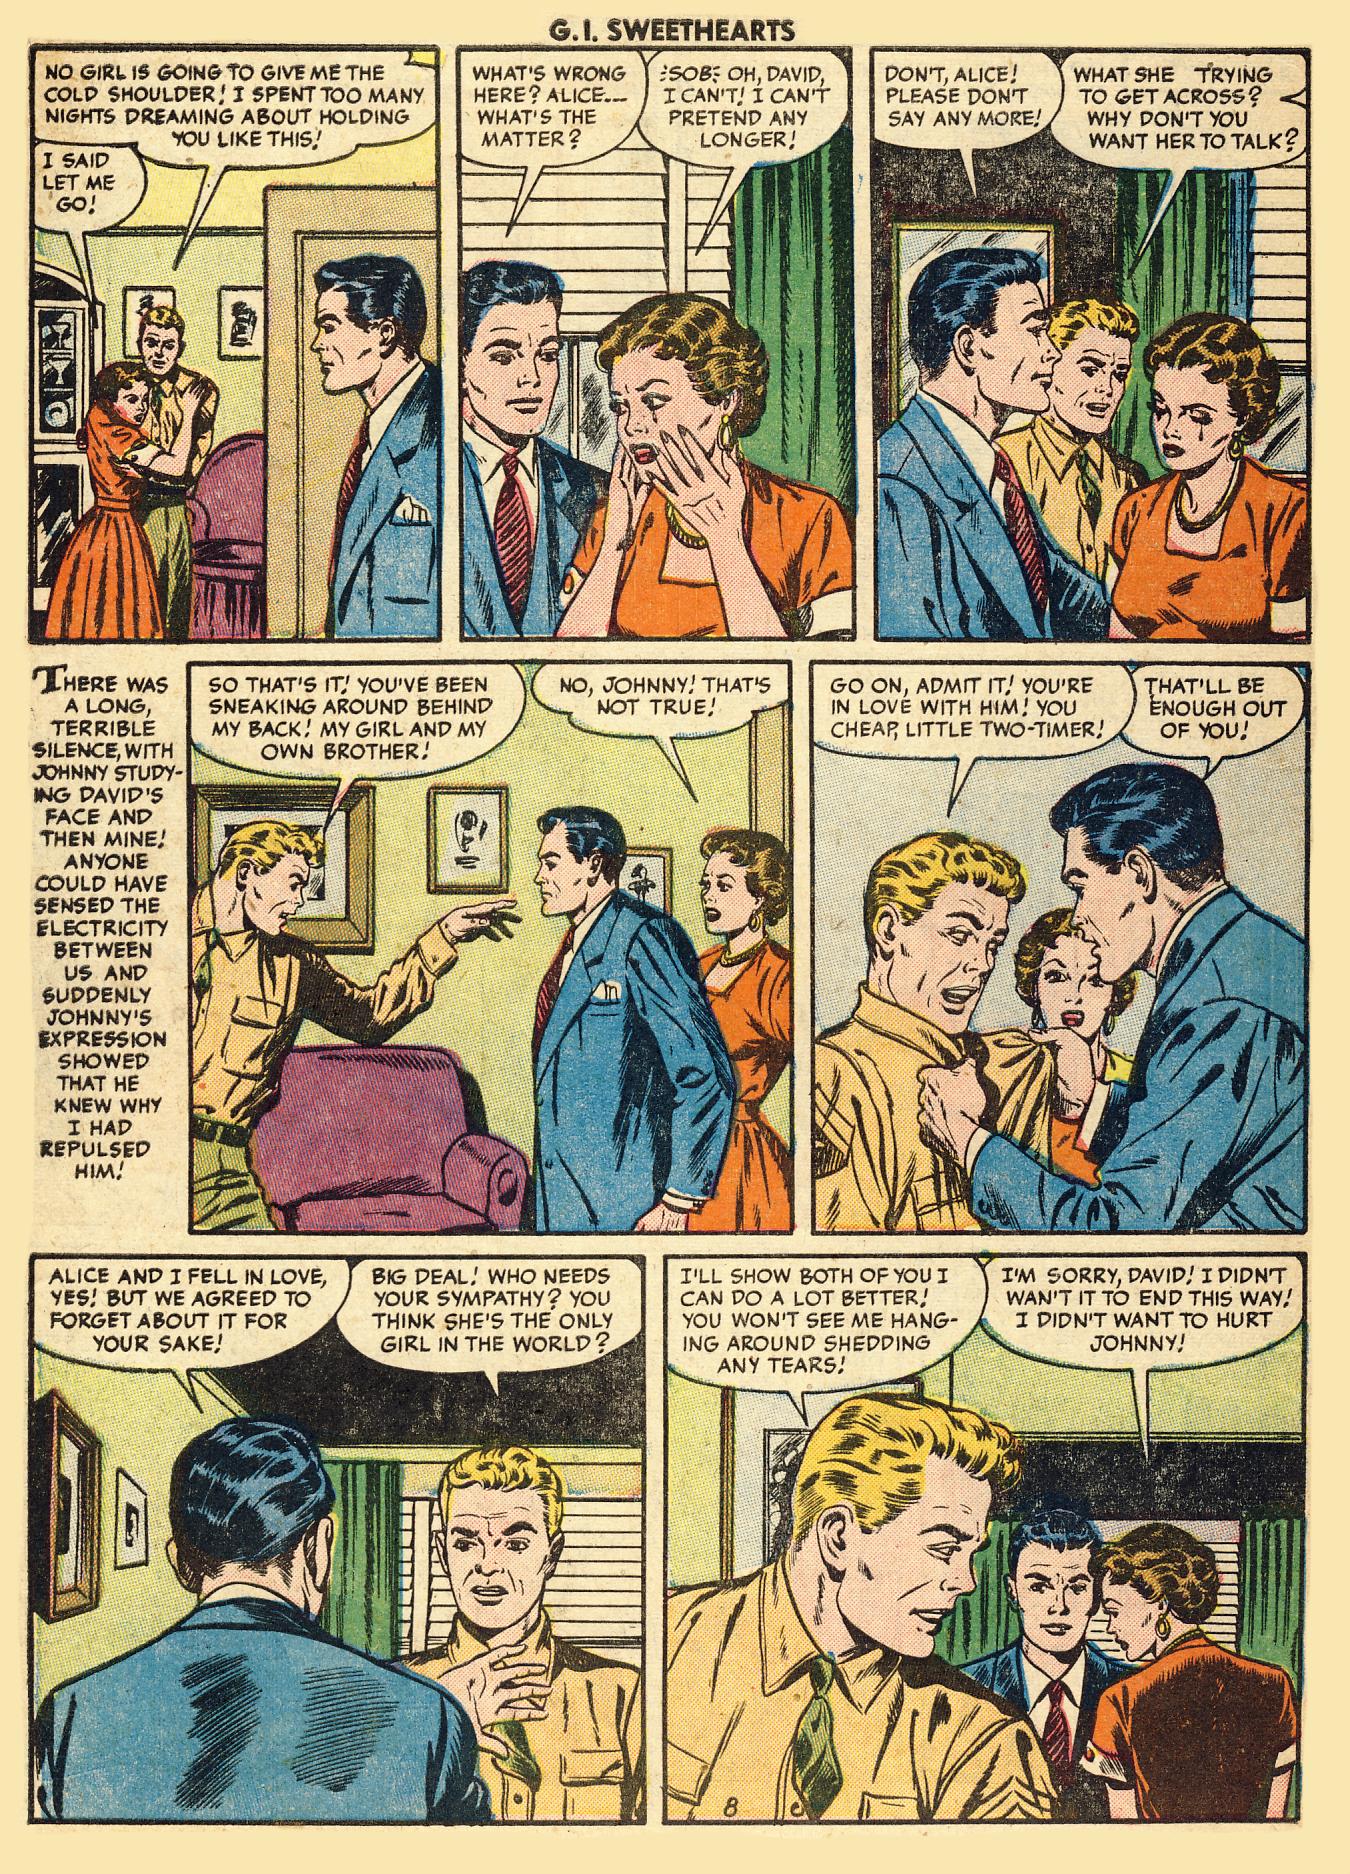 Read online G.I. Sweethearts comic -  Issue #41 - 10